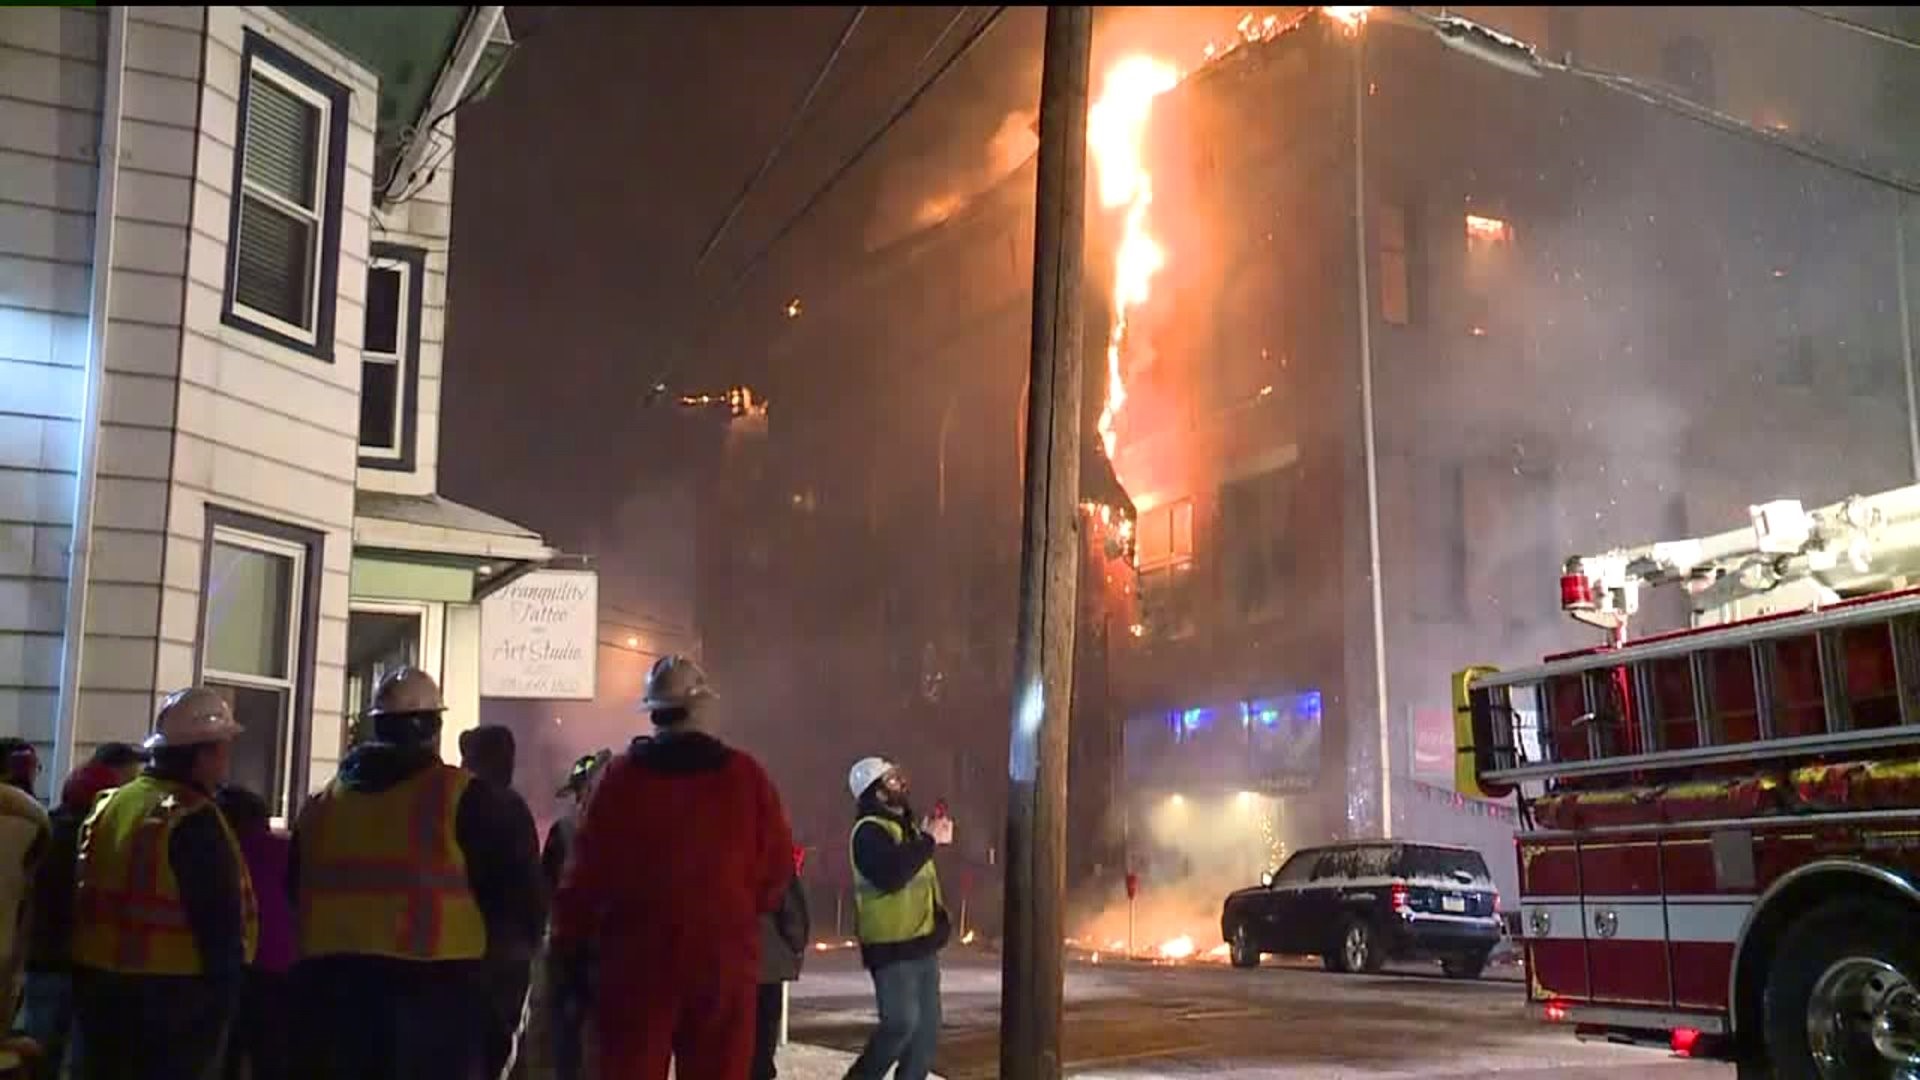 Building Gutted, Roof Collapses During Fire in Shamokin